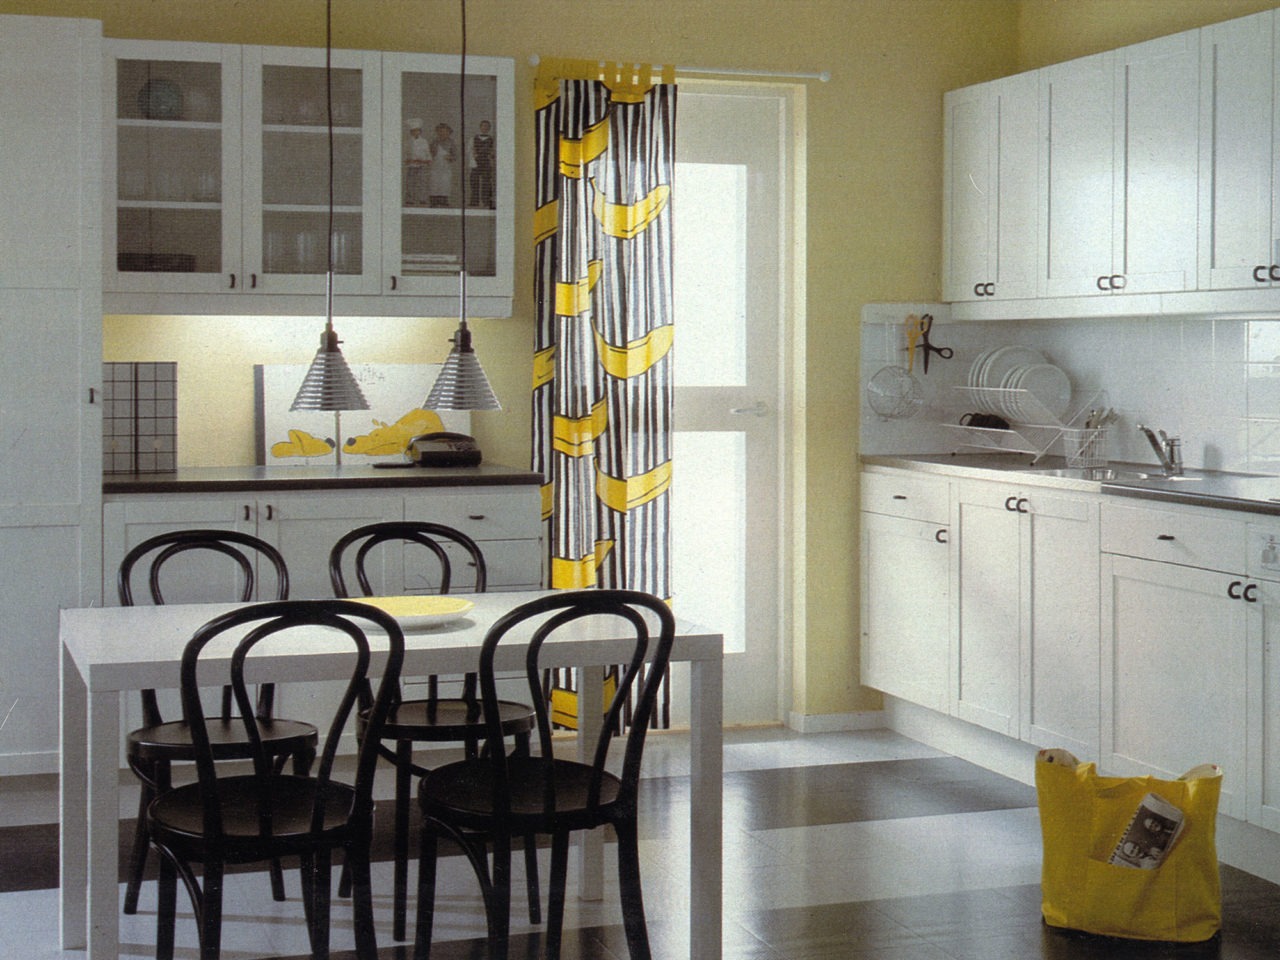 A kitchen in white apart from pin-back chairs at a dining table and details in black, and a banana-patterned curtain at the kitchen entrance.